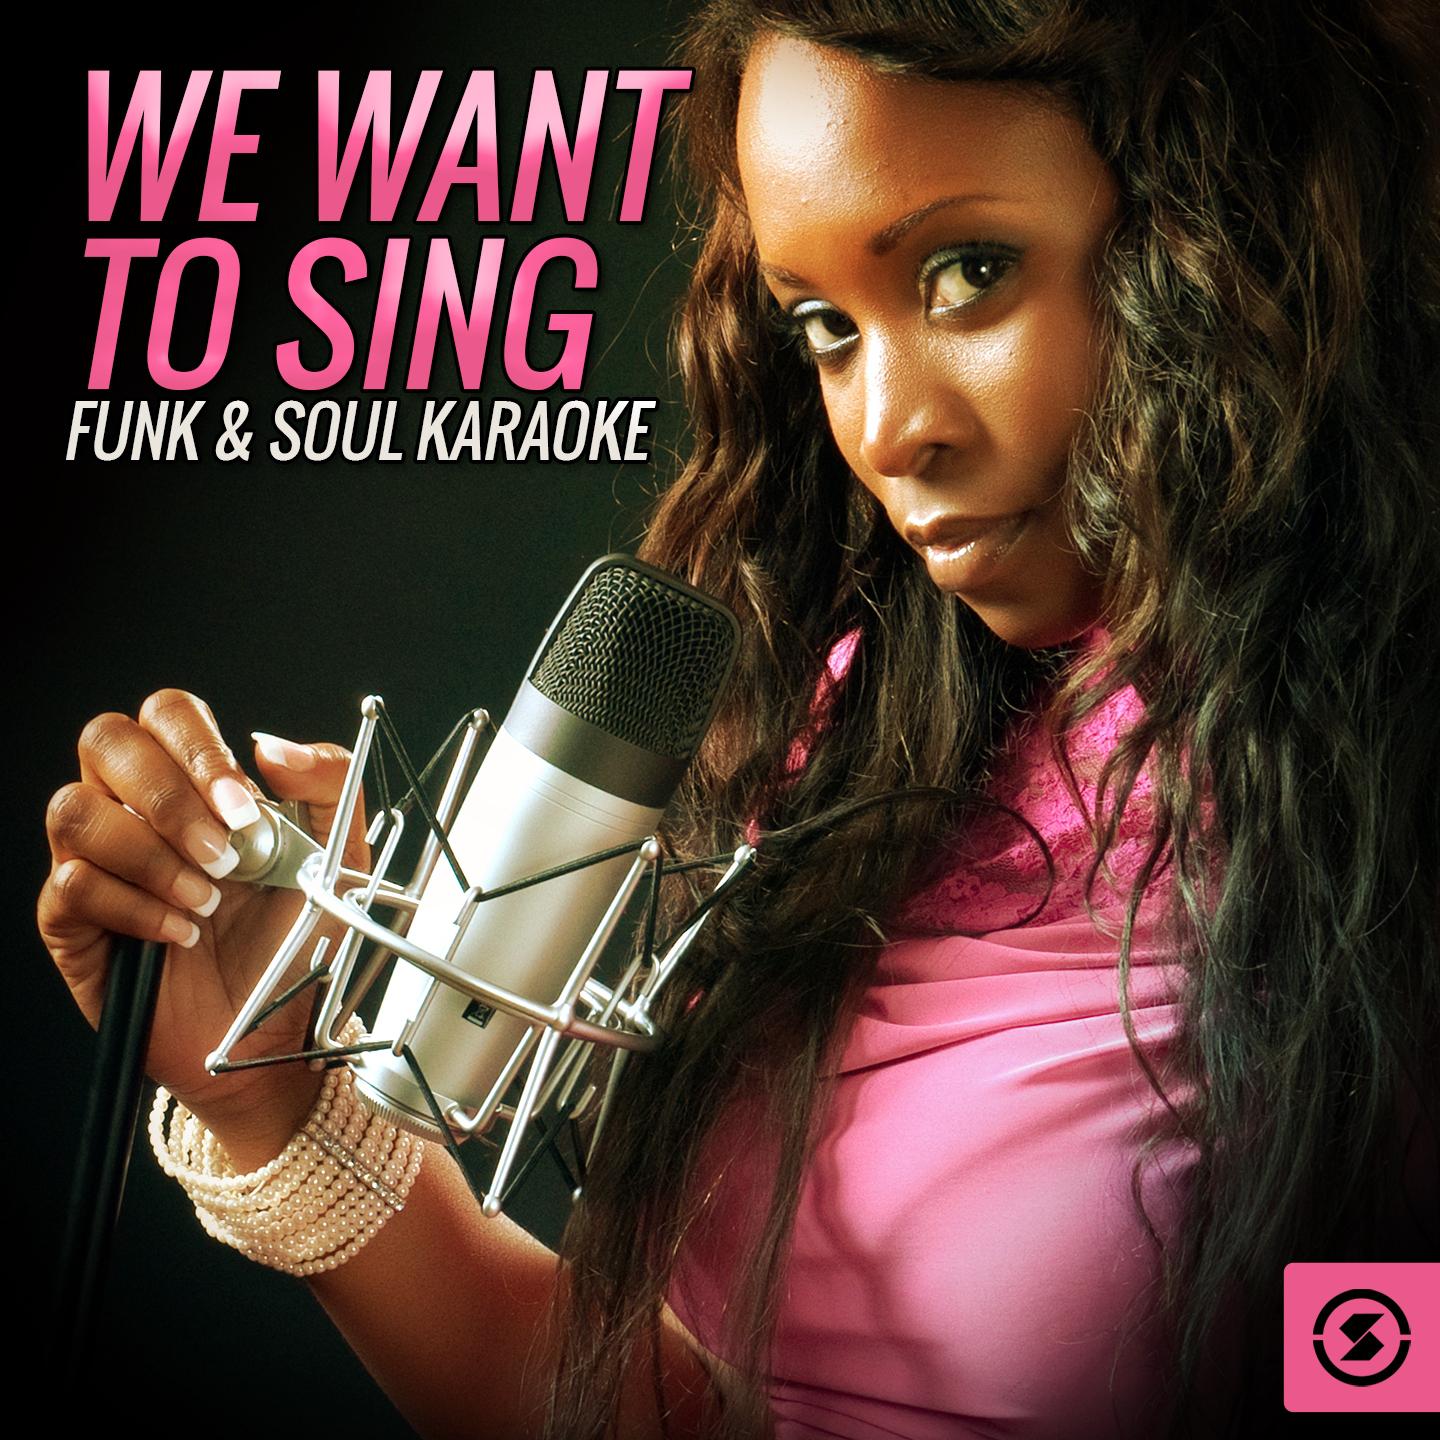 We Want to Sing Funk and Soul Karaoke